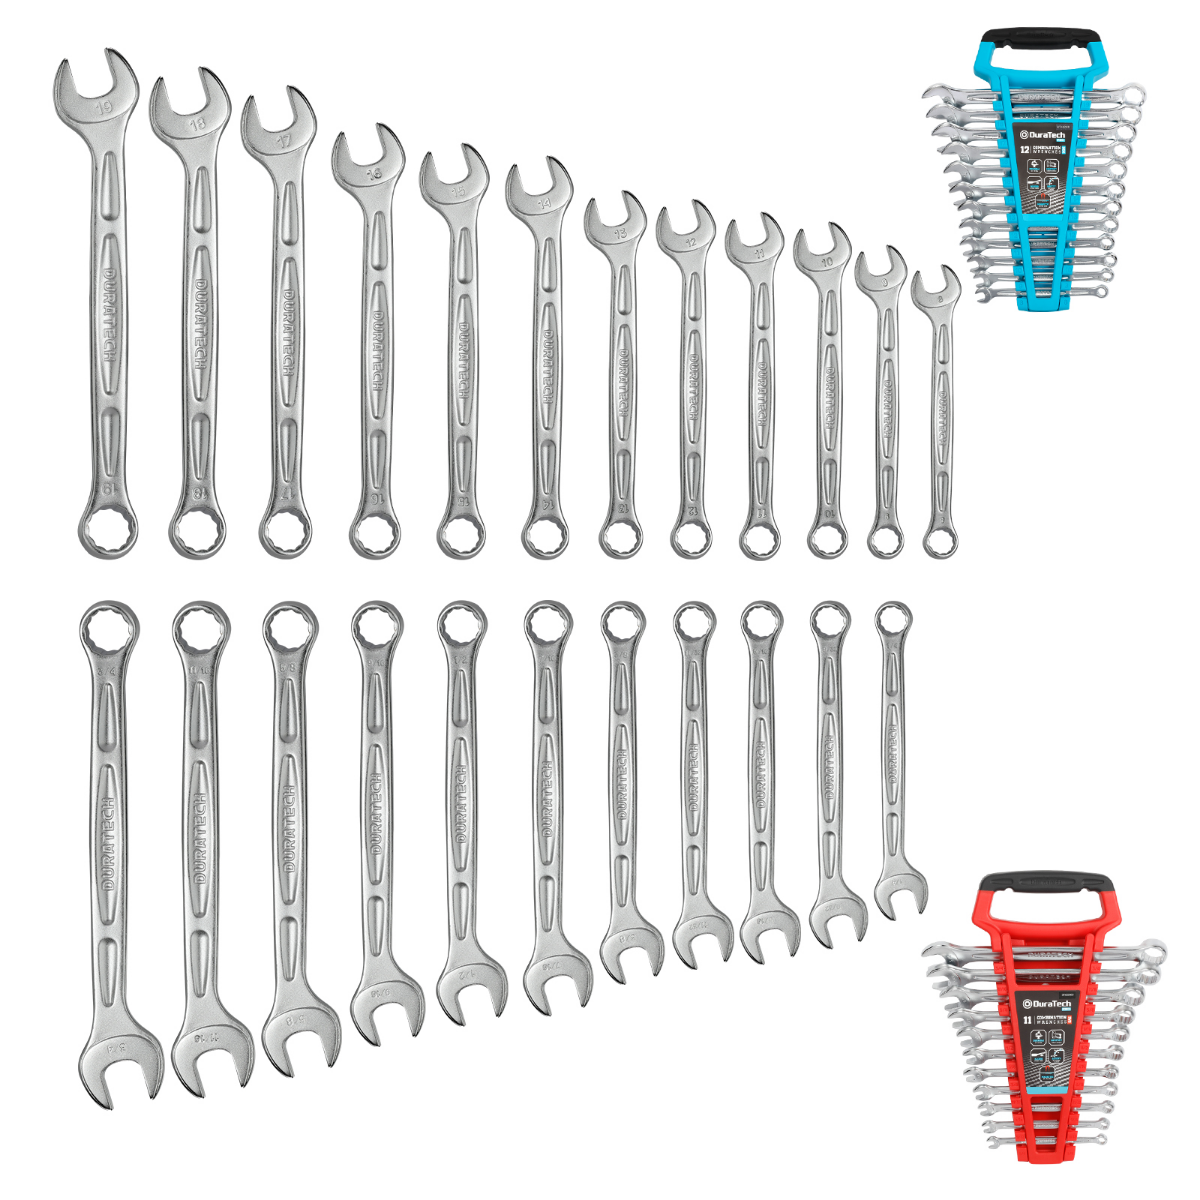 23-Piece Premium SAE and Metric Combination Wrench Set in Roll-up Pouch |  Inch Size 1/4 - 3/4” and Metric Size 8 - 19mm | Chrome Vanadium Steel